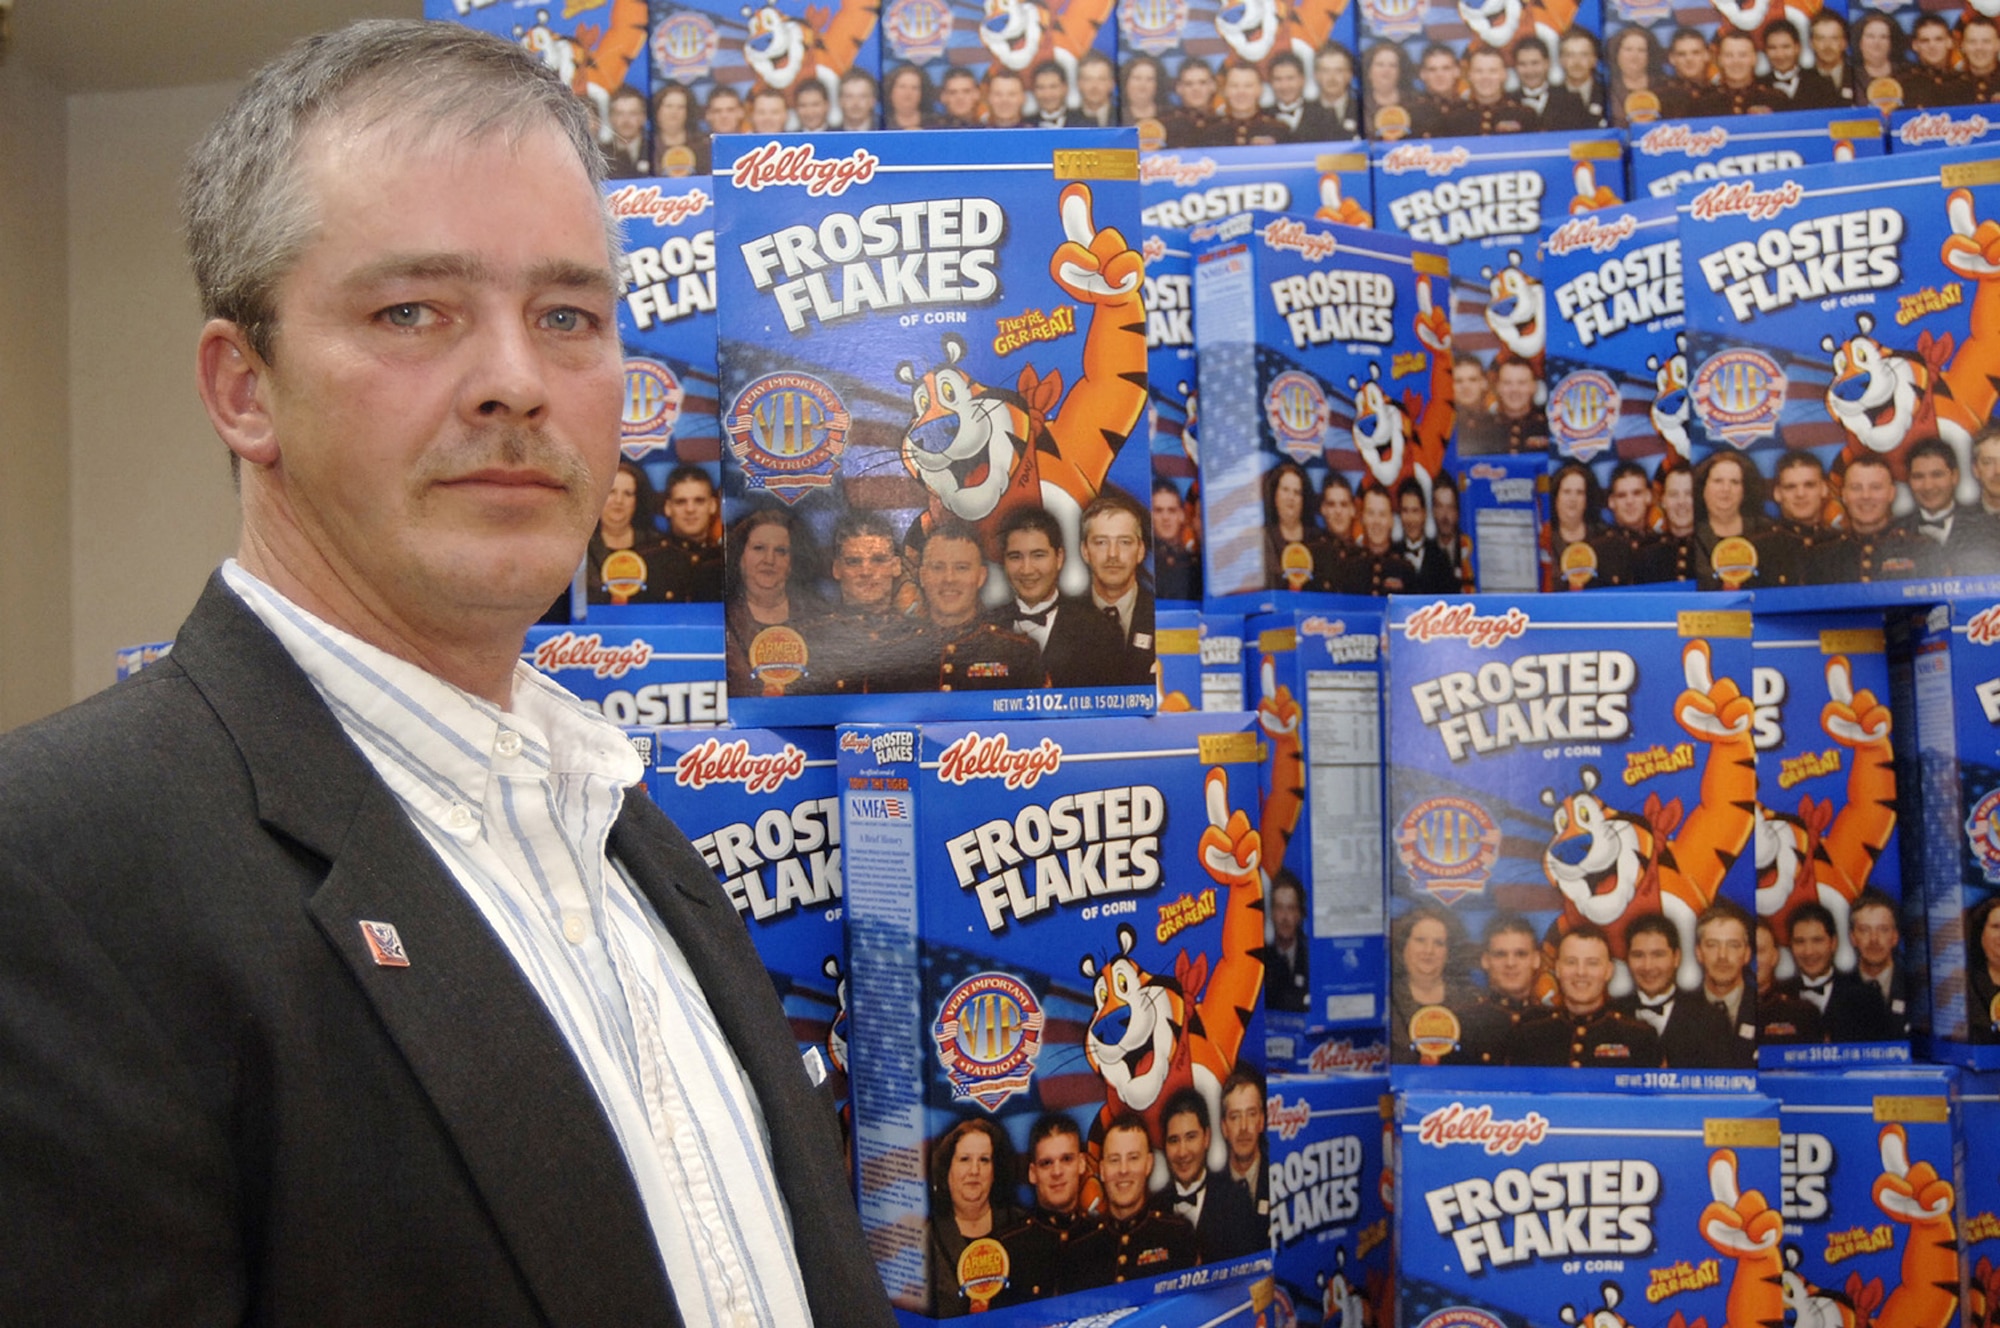 Defense Commissary Agency employee Robert Davison is one of five recipients of the 2005 Very Important Patriot Award from the military community and featured on special-edition boxes of Kellogg’s Frosted Flakes this summer. (U.S. Air Force photo by Senior Airman Cecilia Rodriguez)